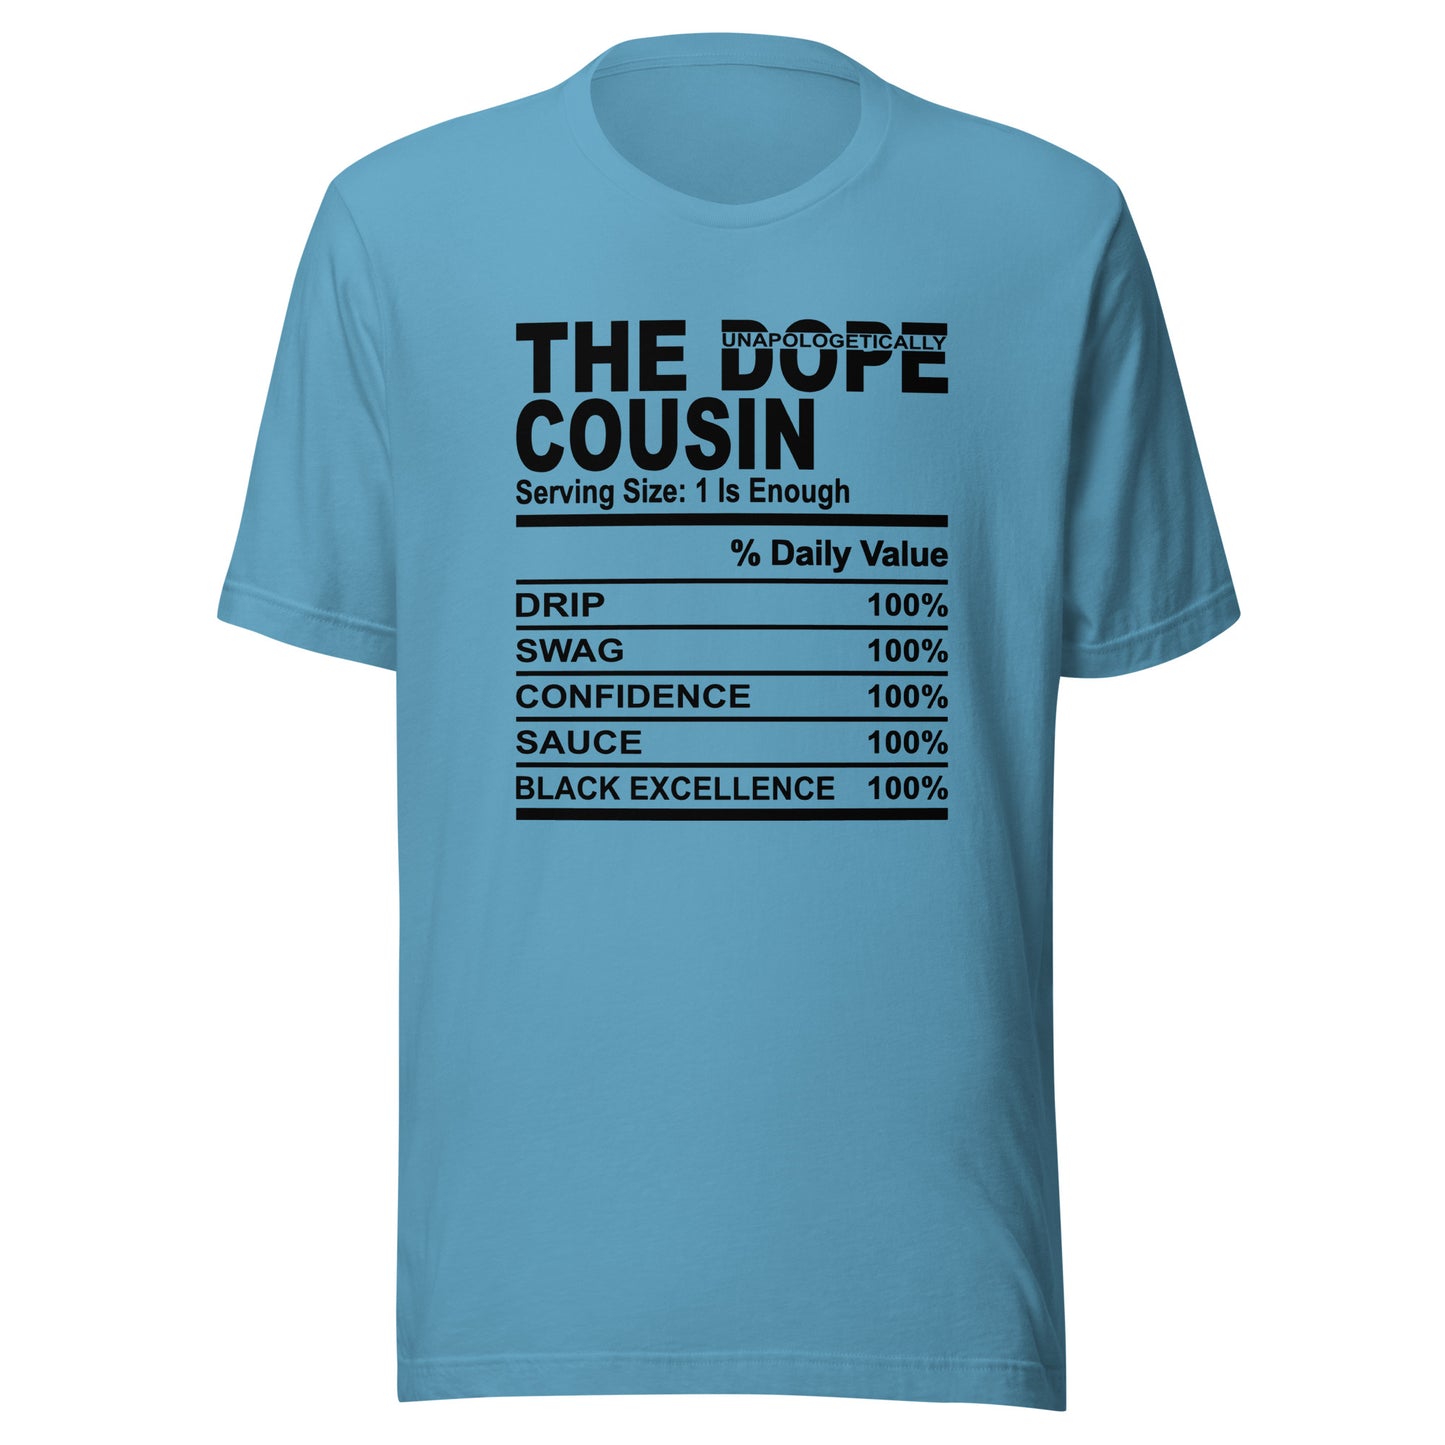 THE DOPE COUSIN (Unapologetically)- 2XL-3XL - Unisex T-Shirt (black print)